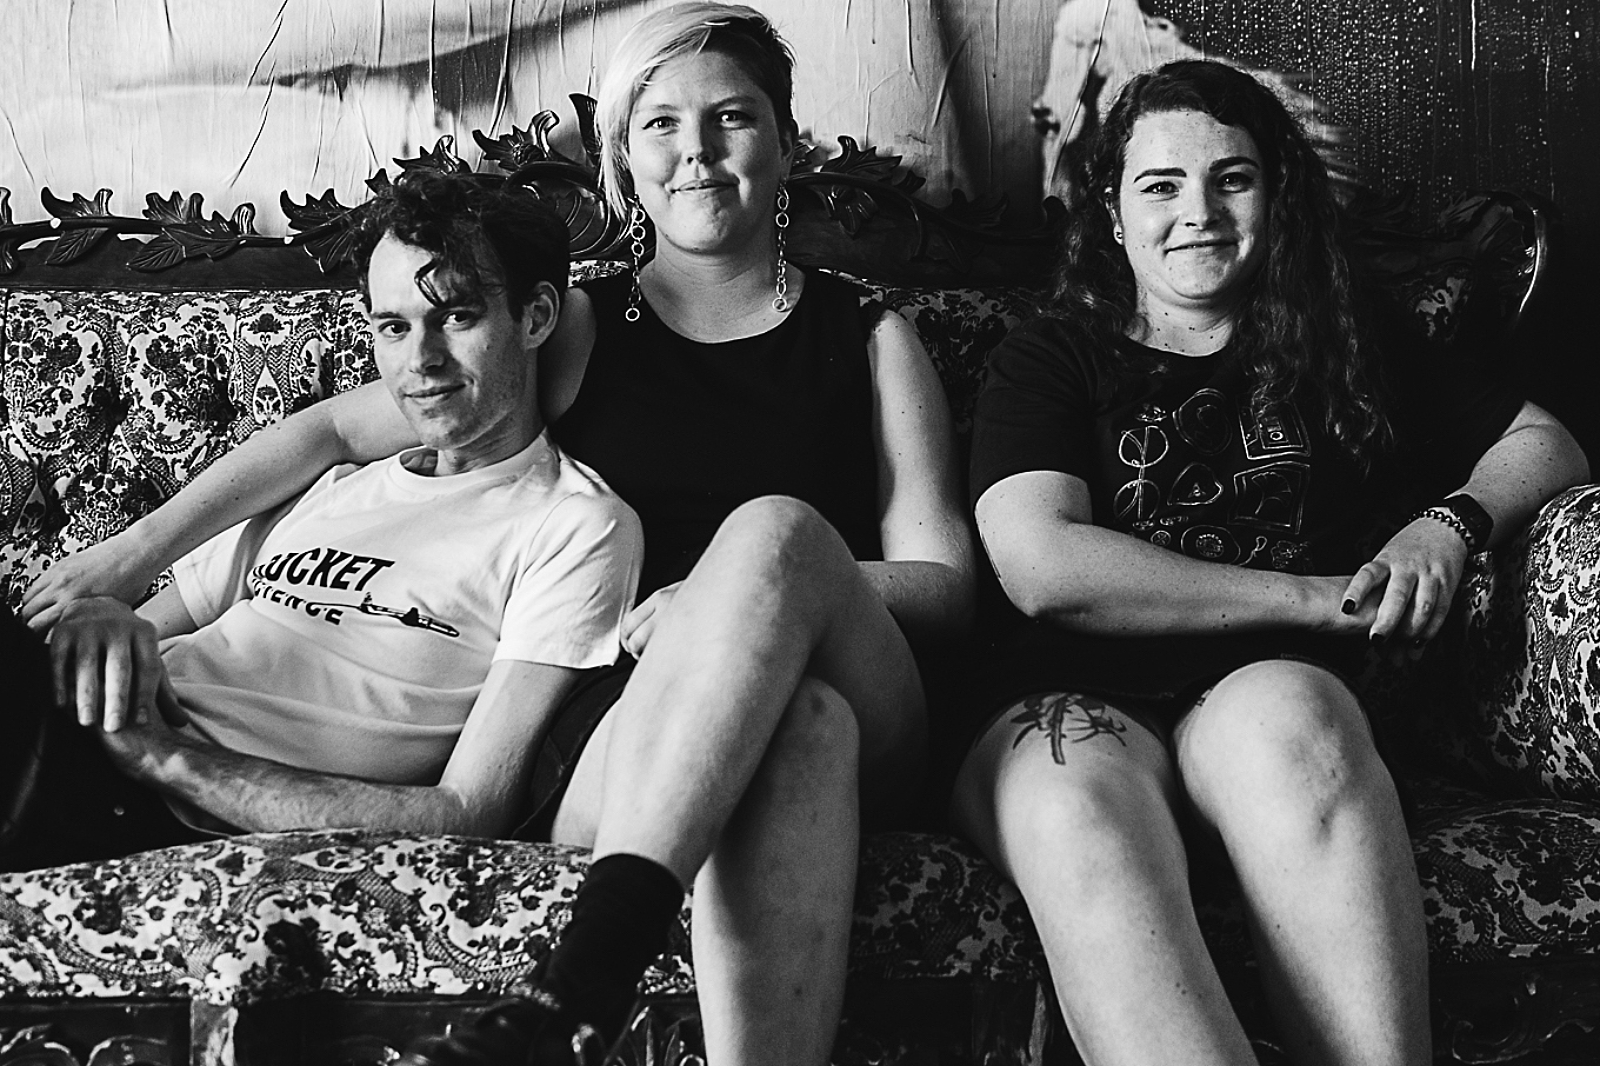 Melbourne's Cable Ties rumble into action on 'Choking to Choose'